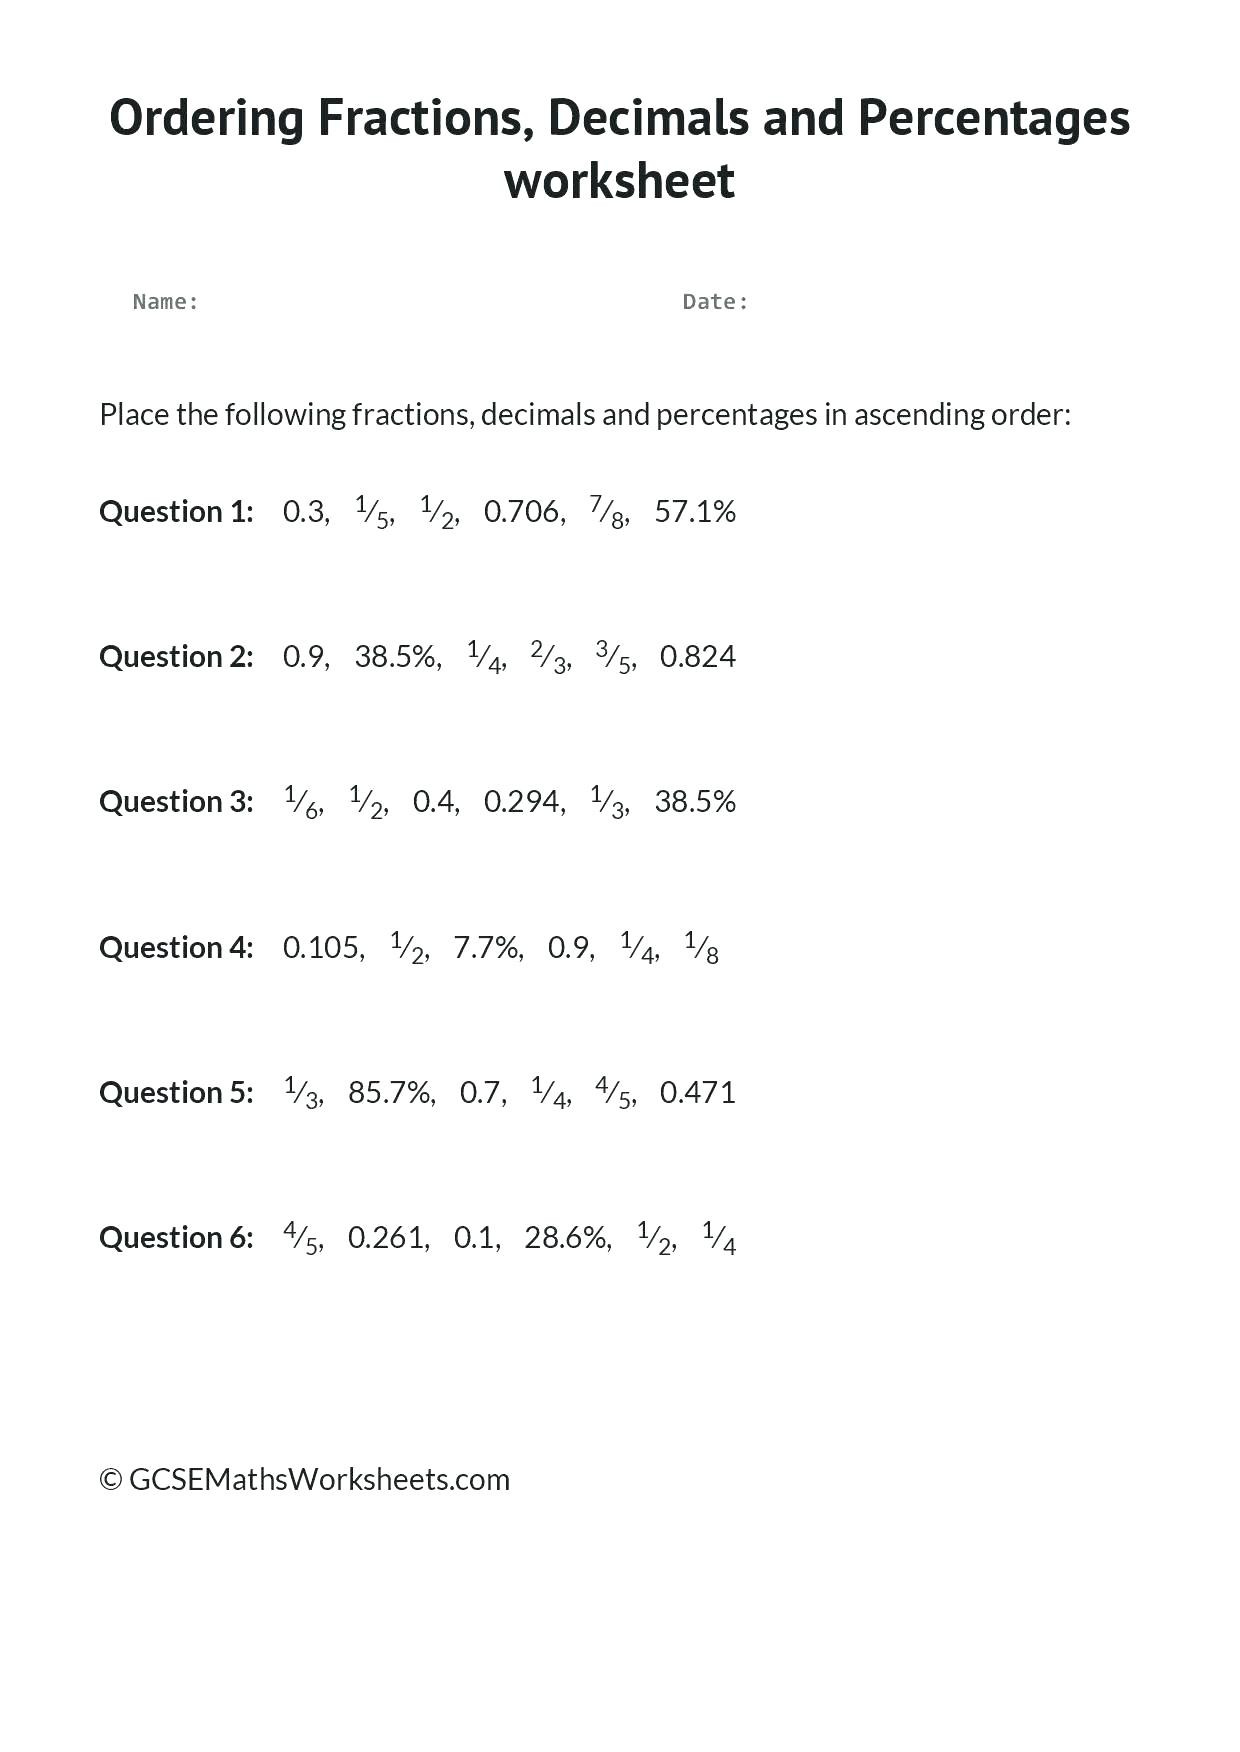 Free Math Worksheets Third Grade 3 Fractions and Decimals Mixed Numbers to Improper Fractions